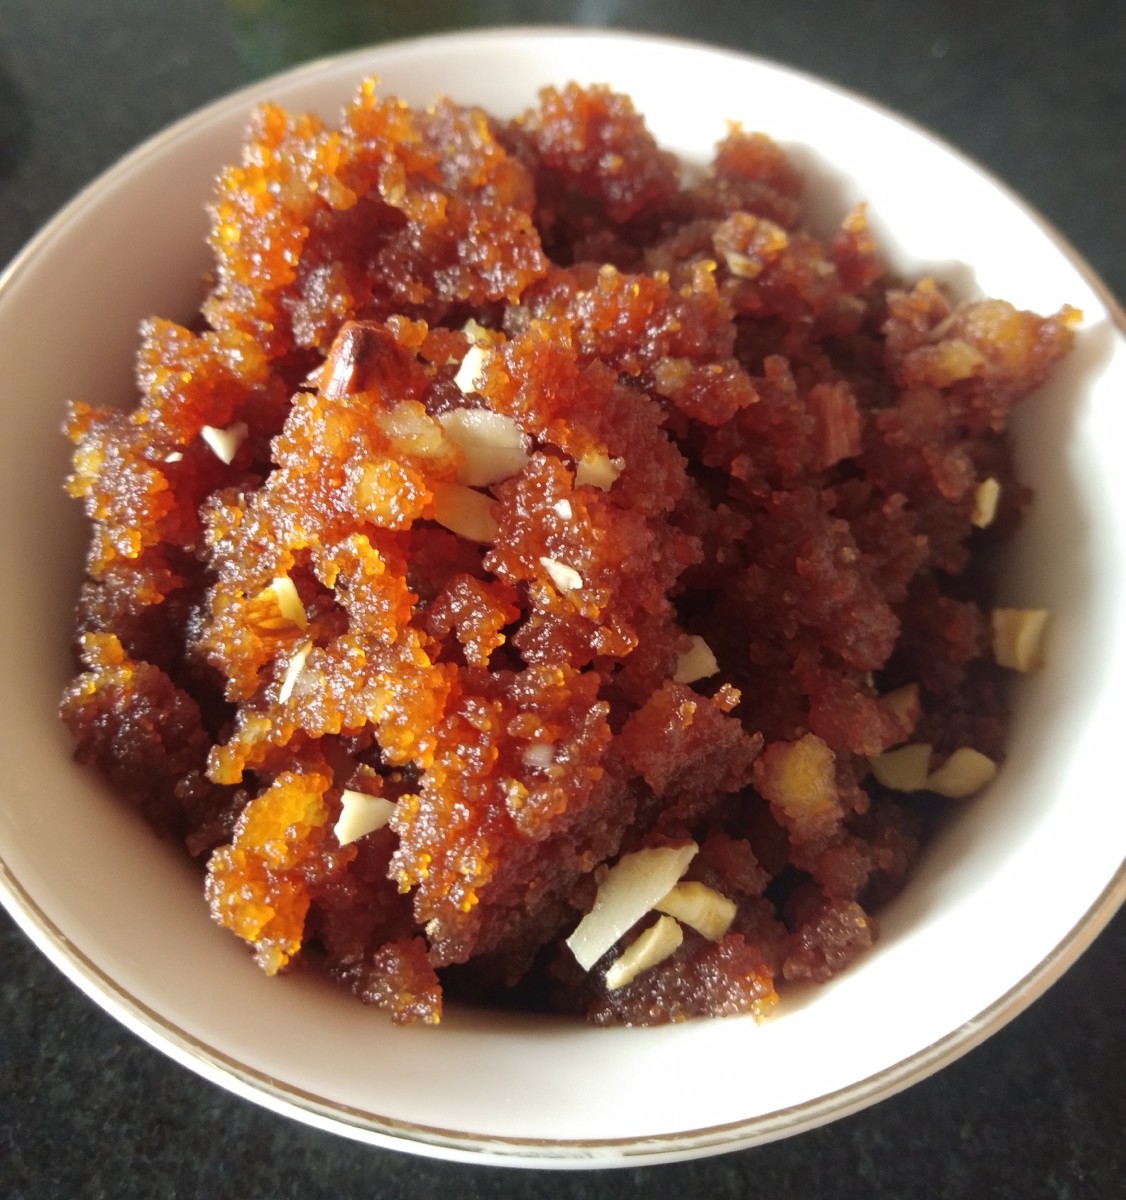 Delicious suji halwa is ready to taste. Serve hot, warm, or at room temperature.